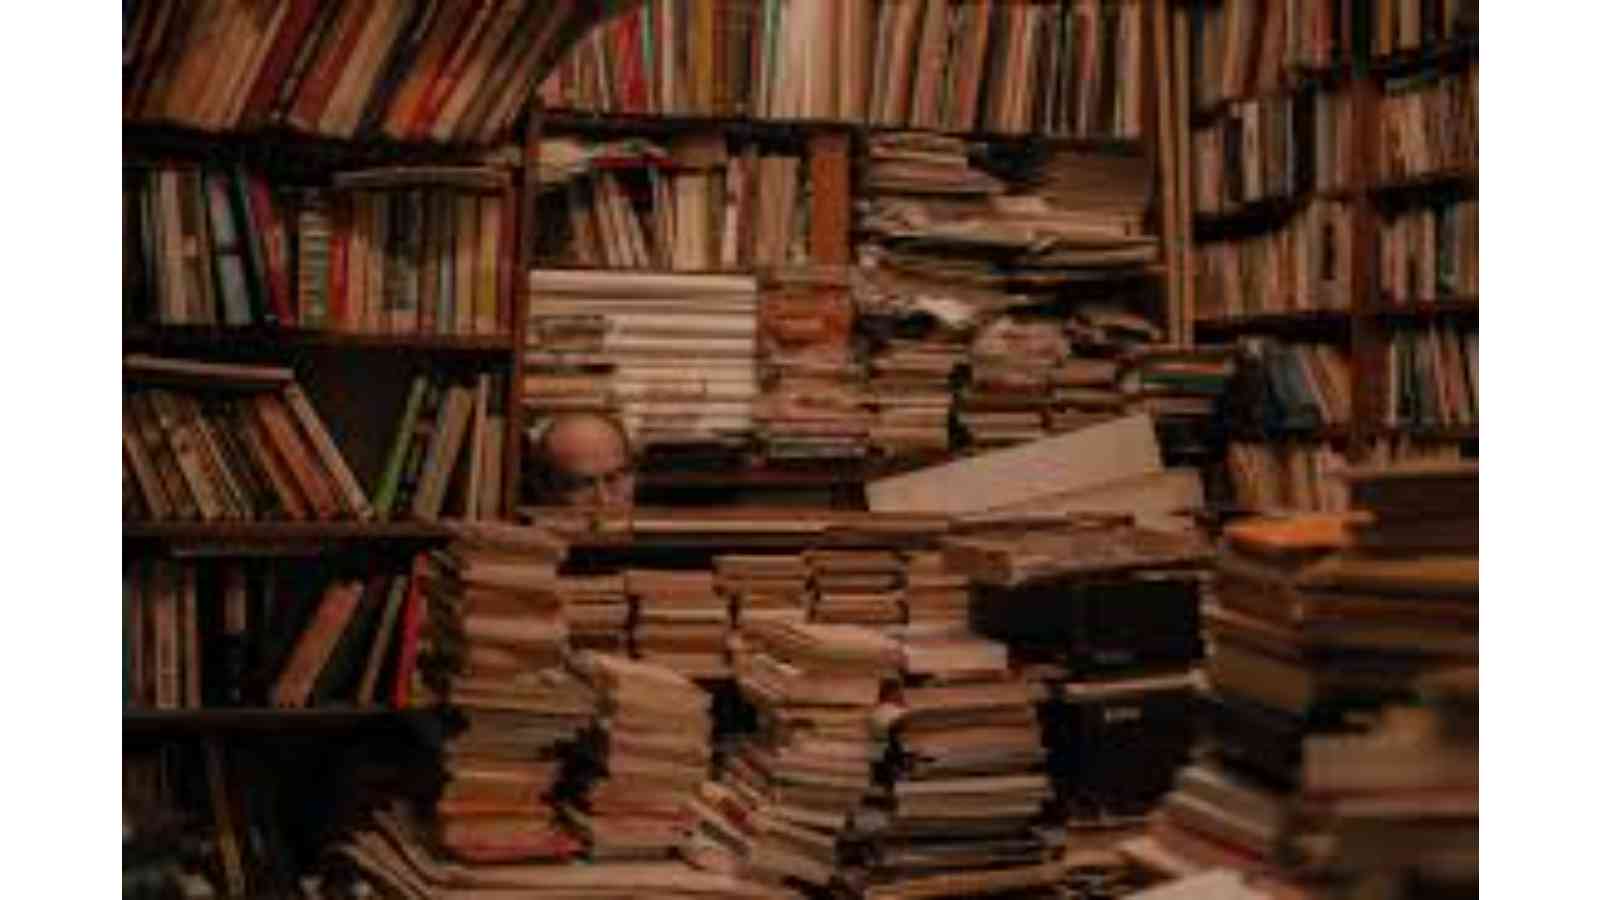 Clean Out Your Bookcase Day 2023: Date, Background, Facts, Activities